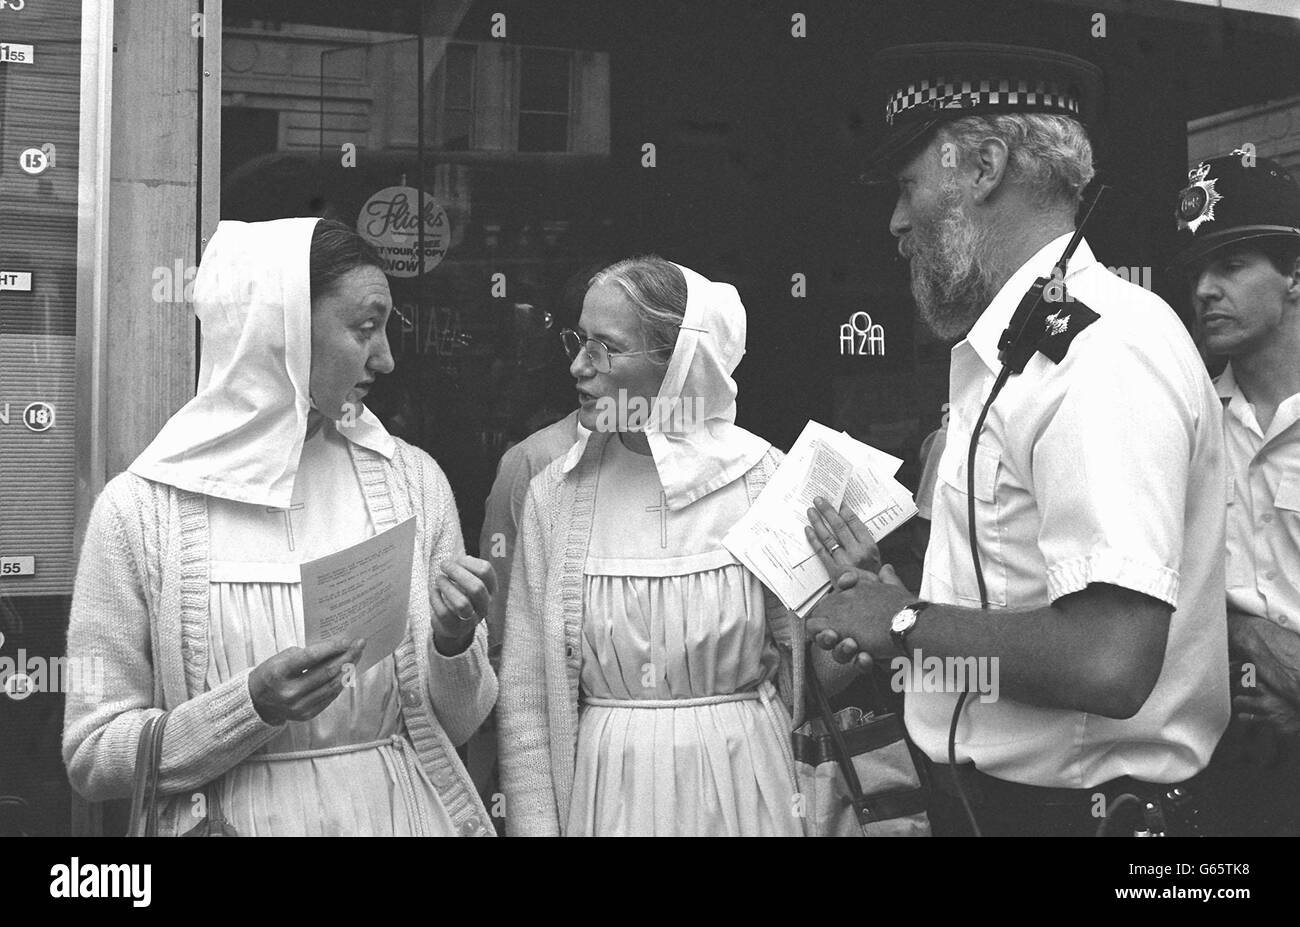 Sister Andrea (left) and Sister Thekla, nuns from the Evangelical Sisterhood of Mary in Hertfordshire, receive a request from the police to move to the other side of the road as they distribute leaflets outside the Plaza Cinema in Piccadilly, London, where the controversial film 'The Last Temptation of Christ' opened and attracted some demonstrators. Stock Photo